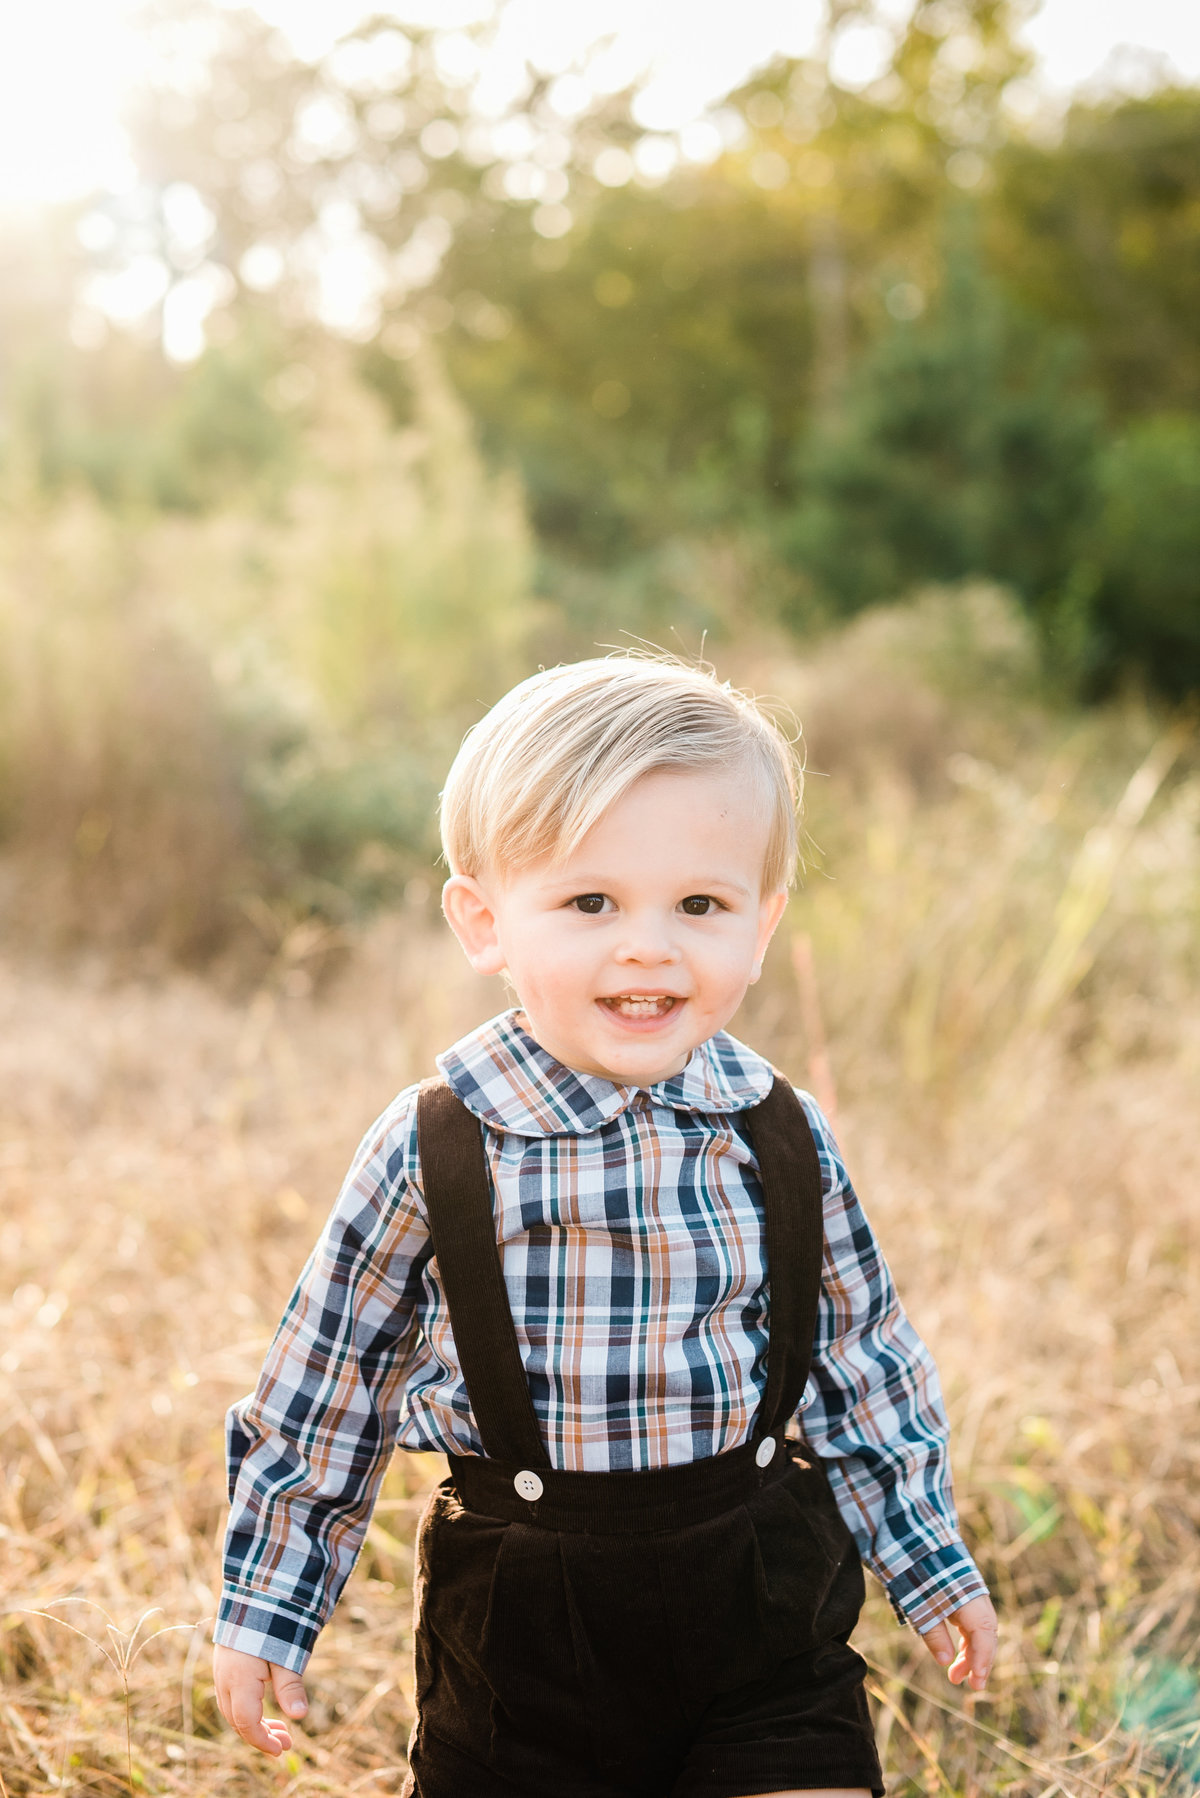 Toddler in corduroy suspenders smiles for a photo during a Raleigh family photography session. Photographed by Raleigh NC Family Photographer A.J. Dunlap Photography.